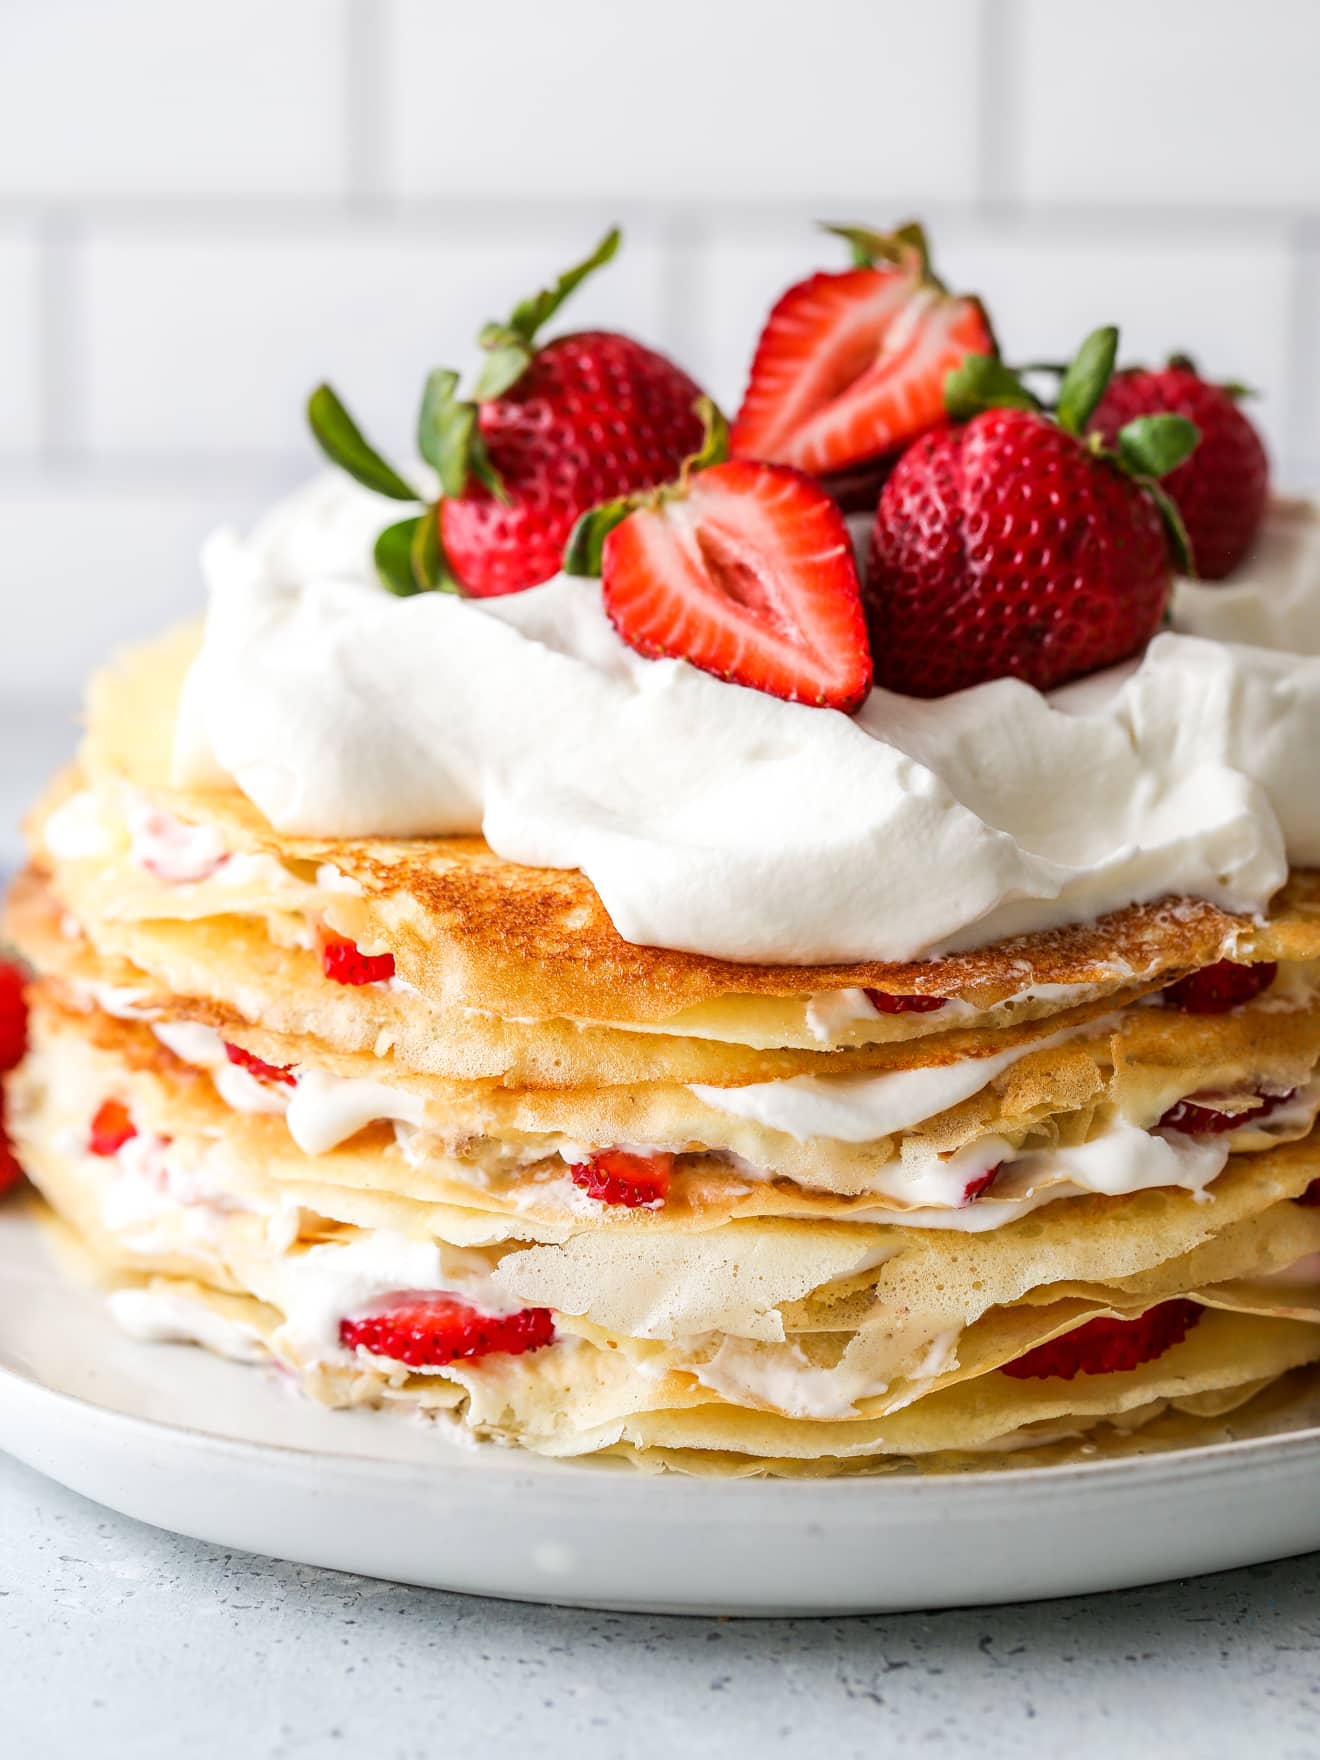 Strawberries and Cream Crepe Cake - Completely Delicious